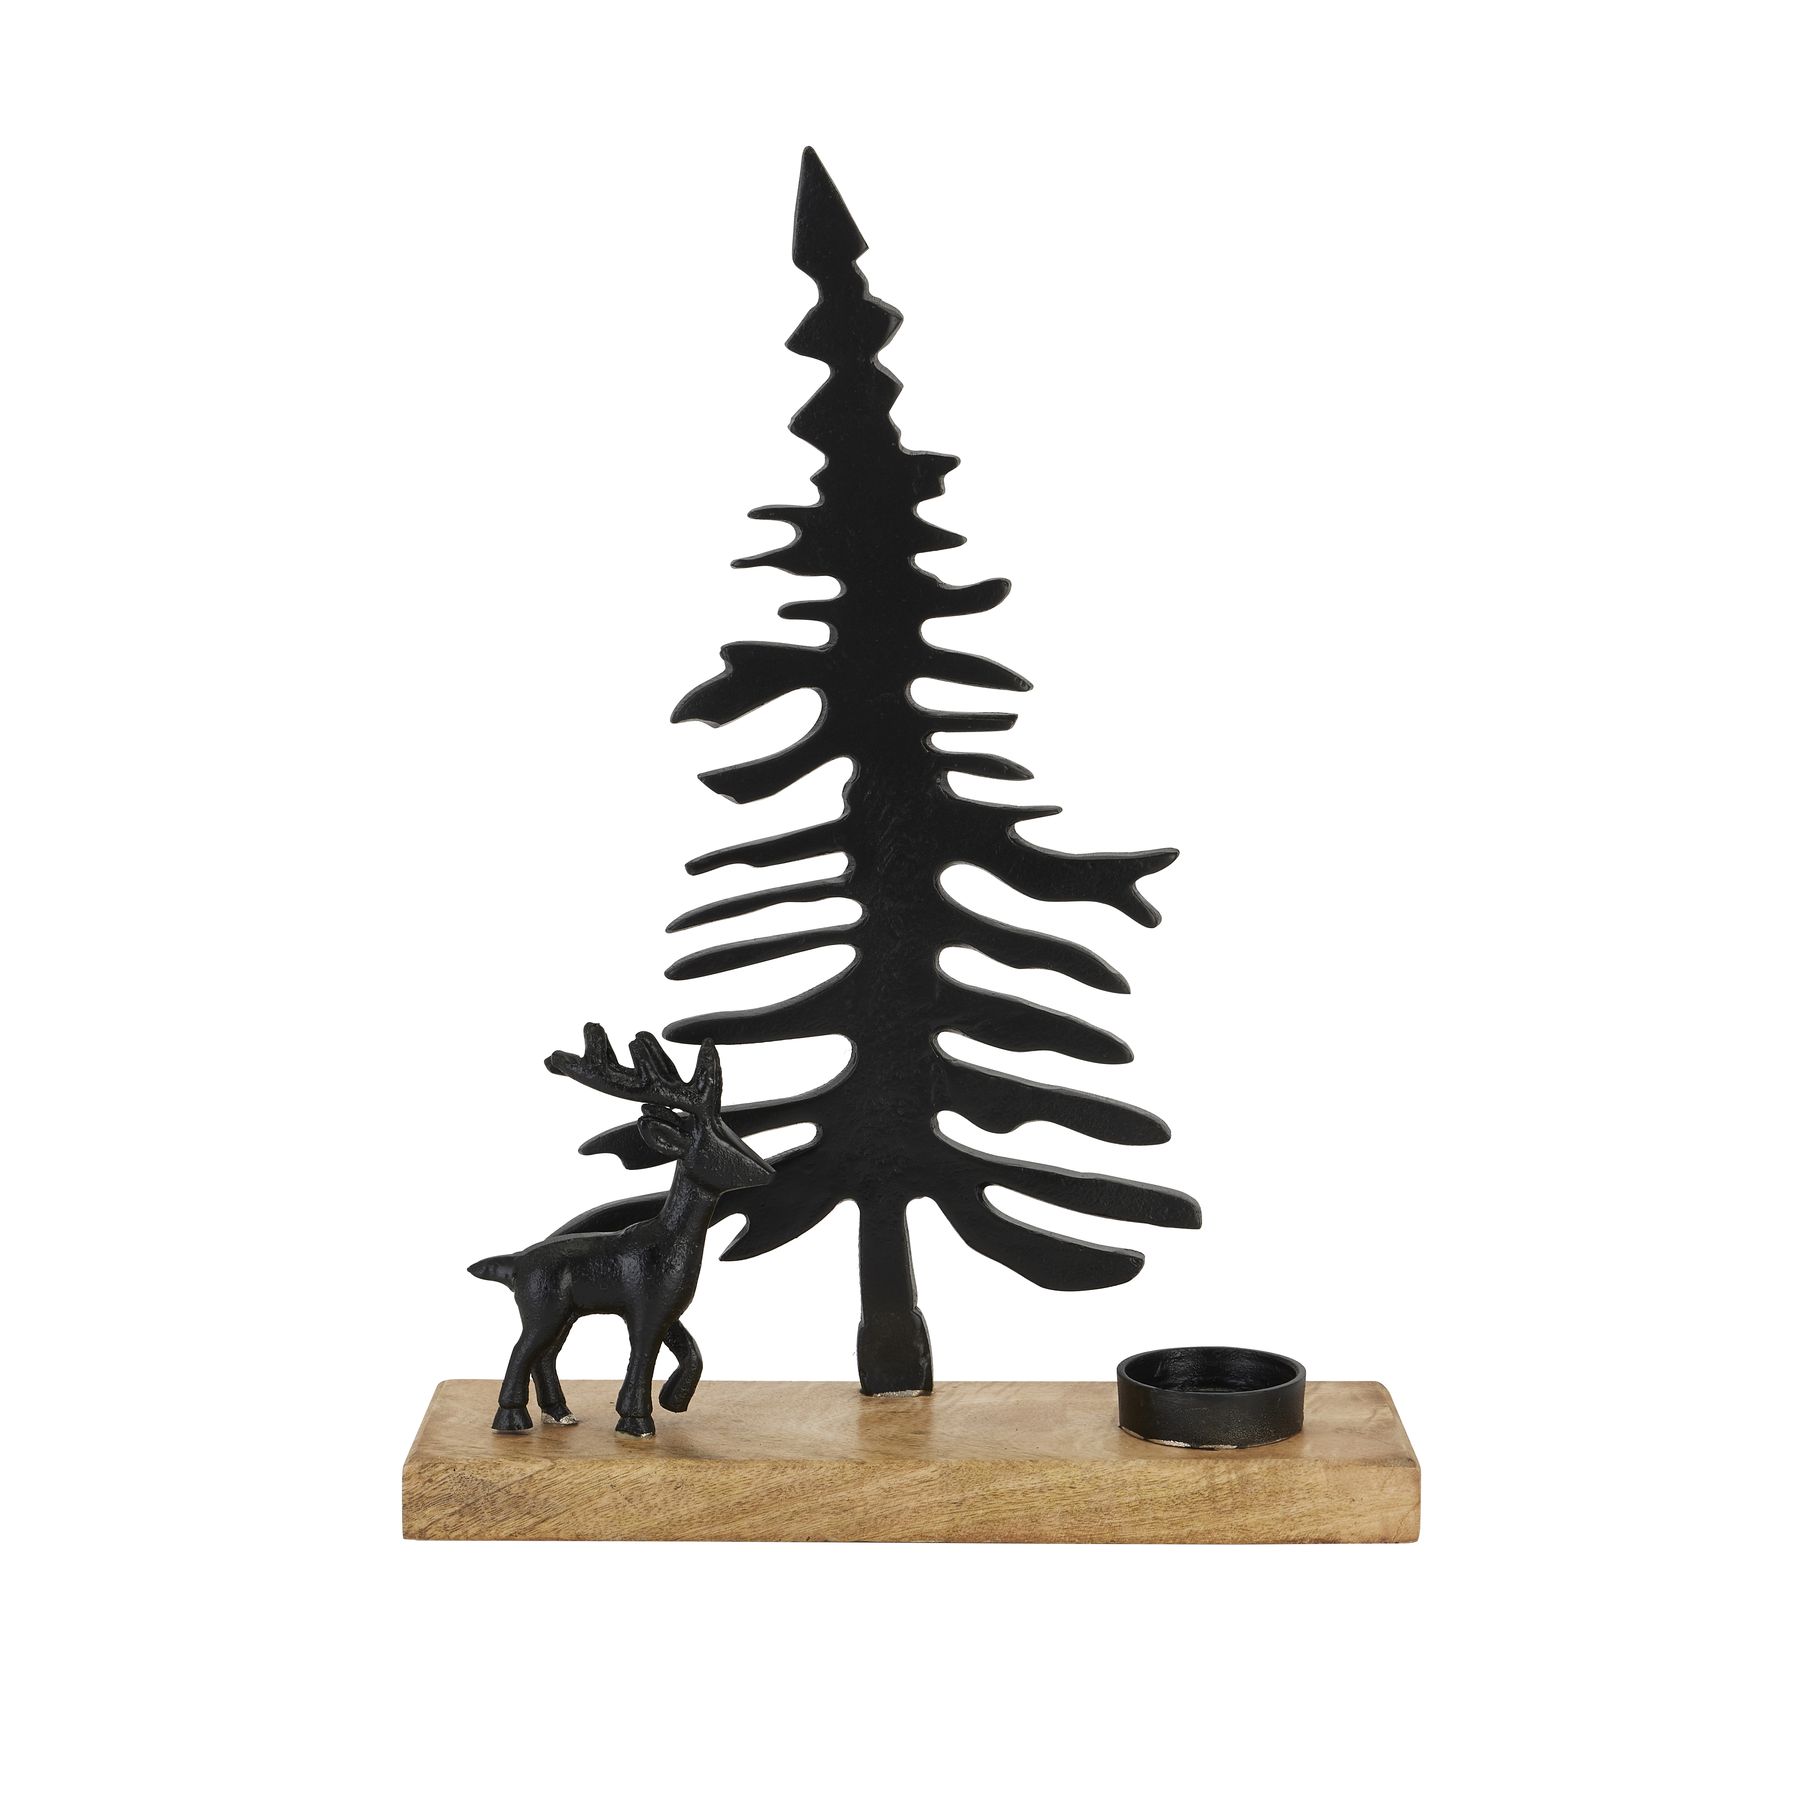 Large Cast Tree And Stag Black Candle Holder Ornament - Image 1